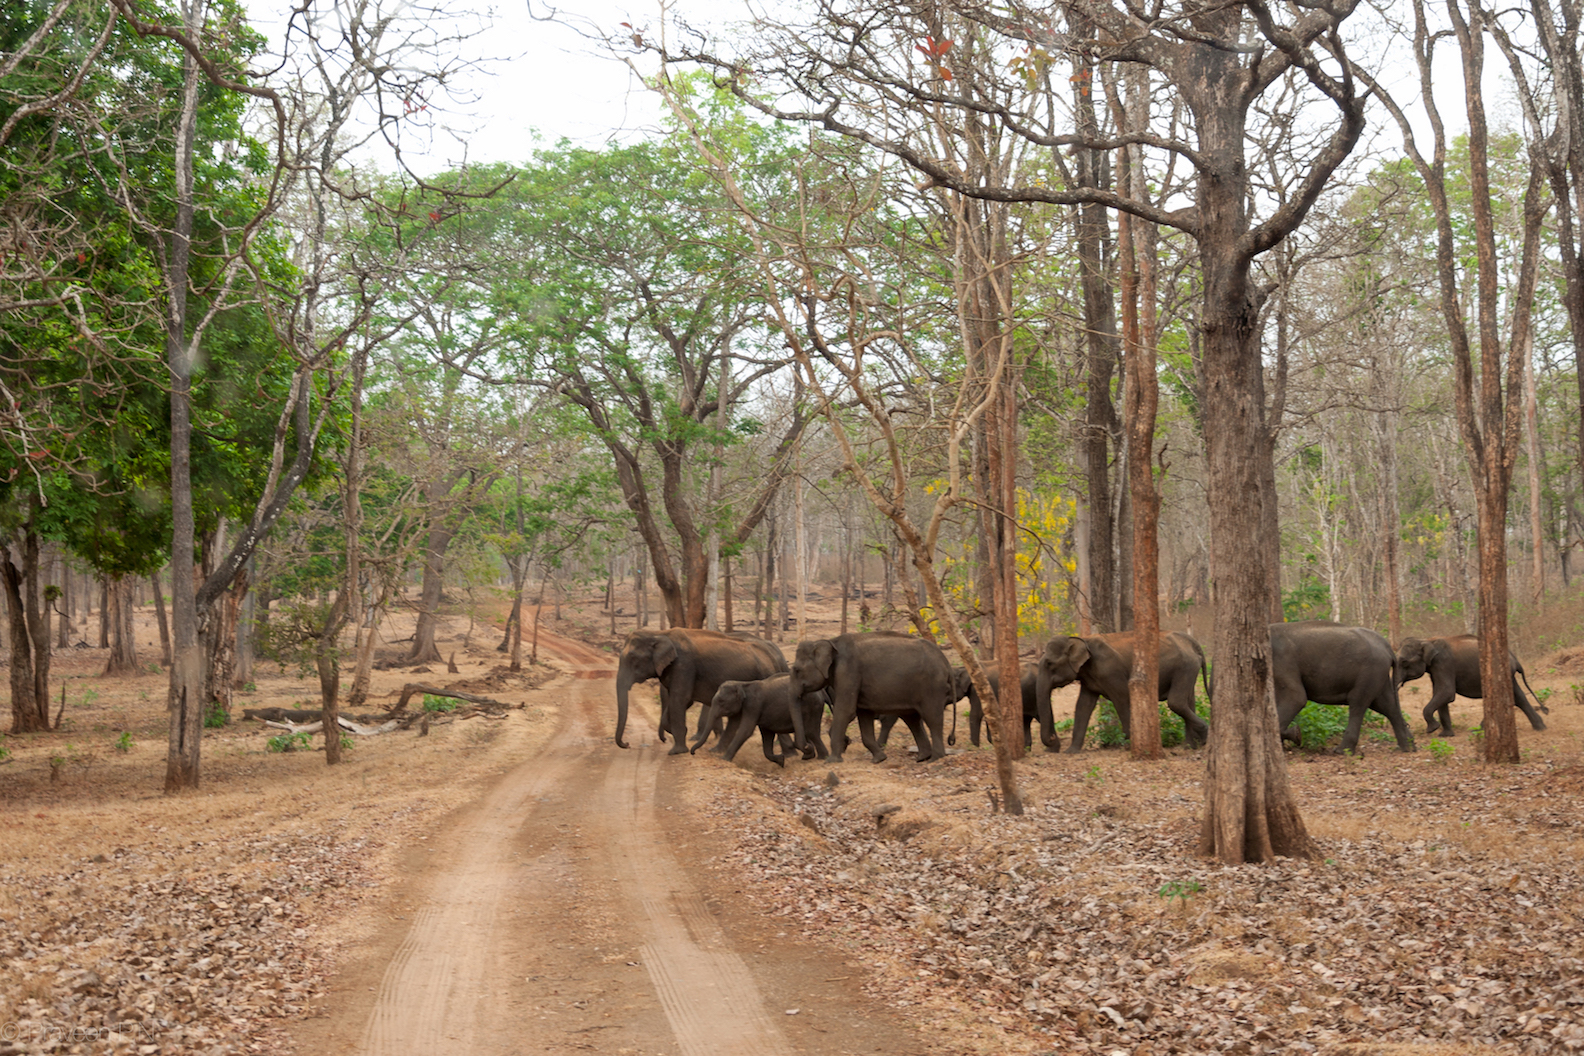 A herd of elephants seen while on a wildlife safari in Kabini forest reserve